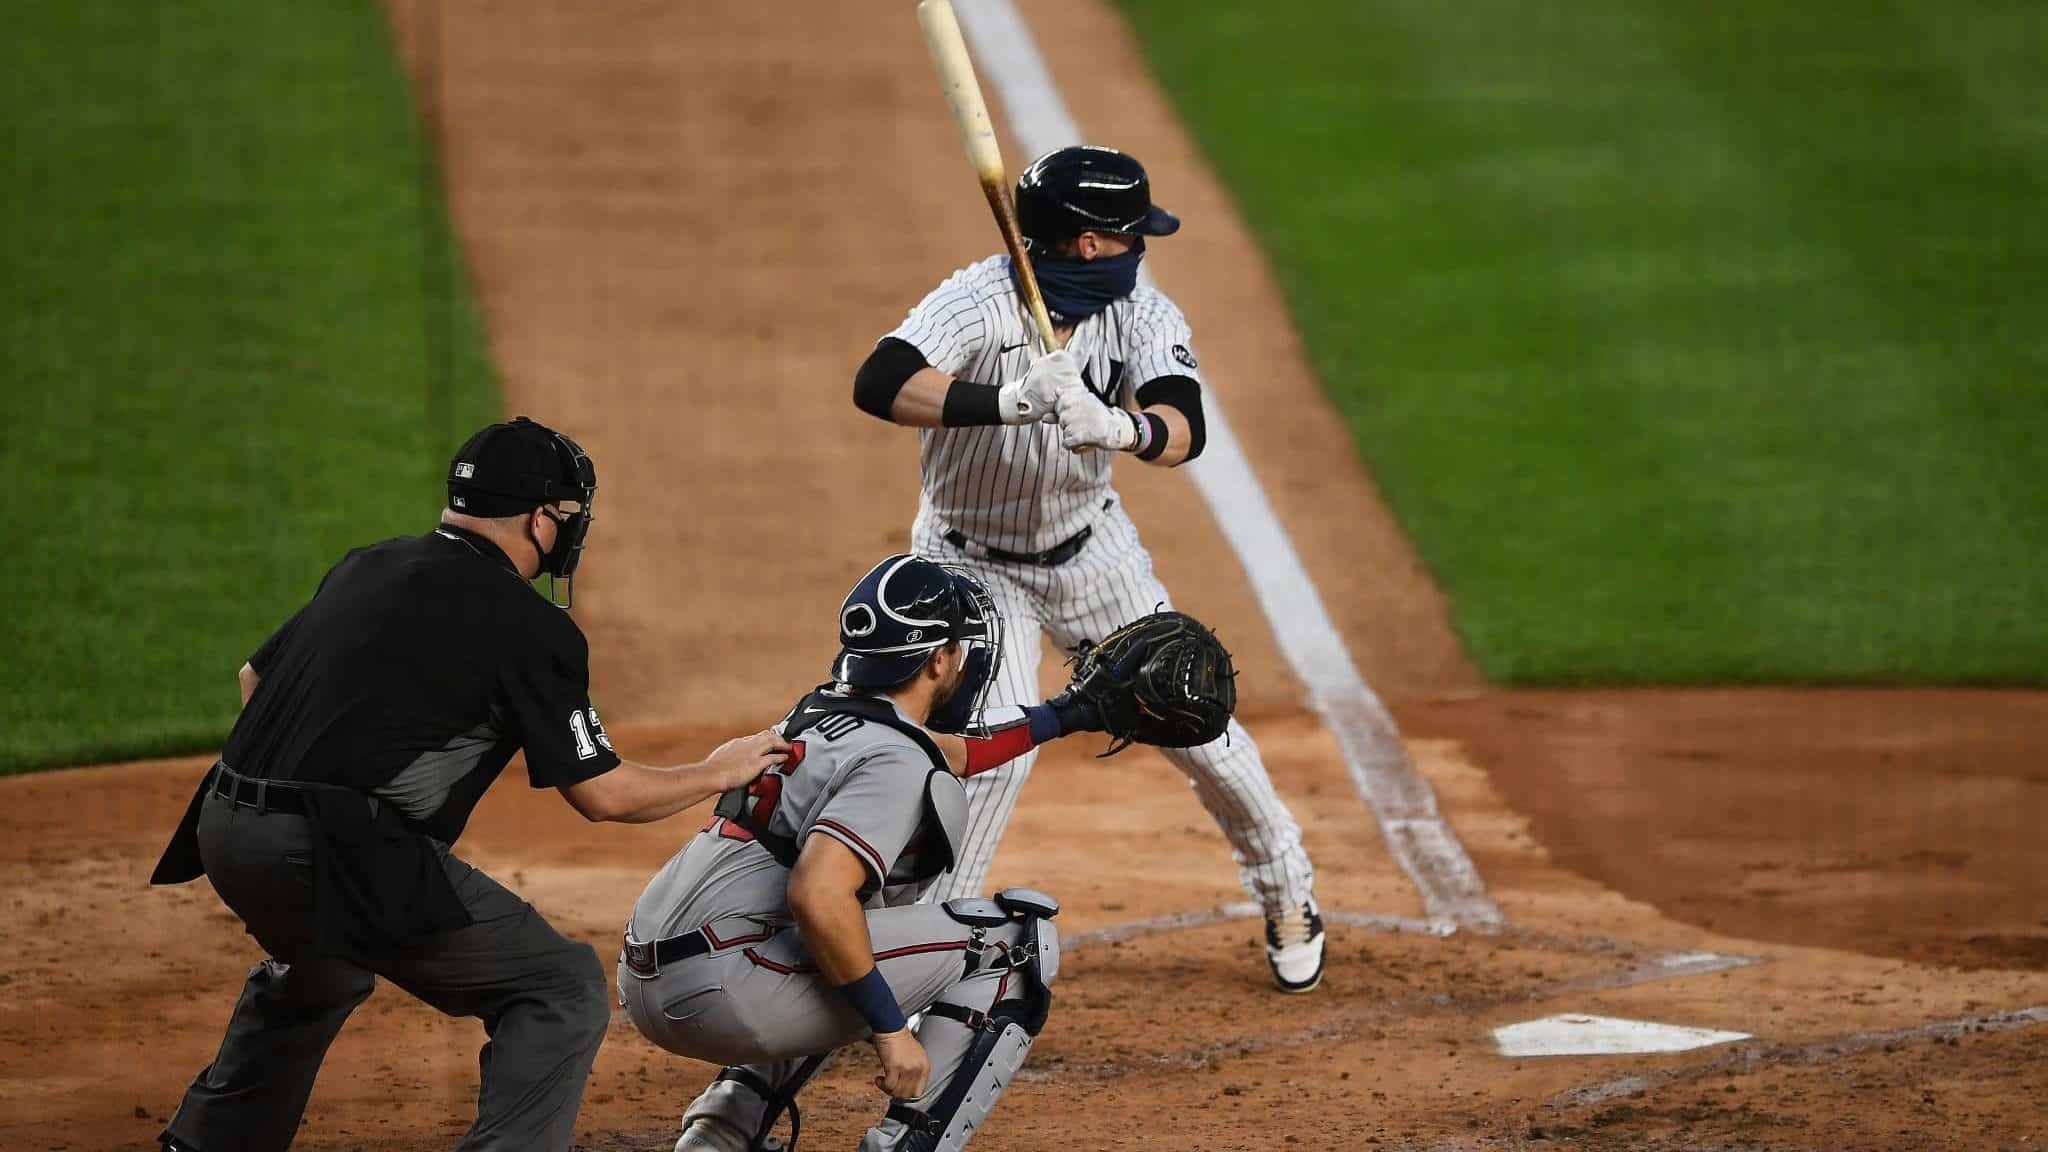 NEW YORK, NEW YORK - AUGUST 12: Clint Frazier #77 of the New York Yankees bats in the second inning against the Atlanta Braves at Yankee Stadium on August 12, 2020 in the Bronx borough of New York City. Frazier hit a home run to tie the game 2-2.